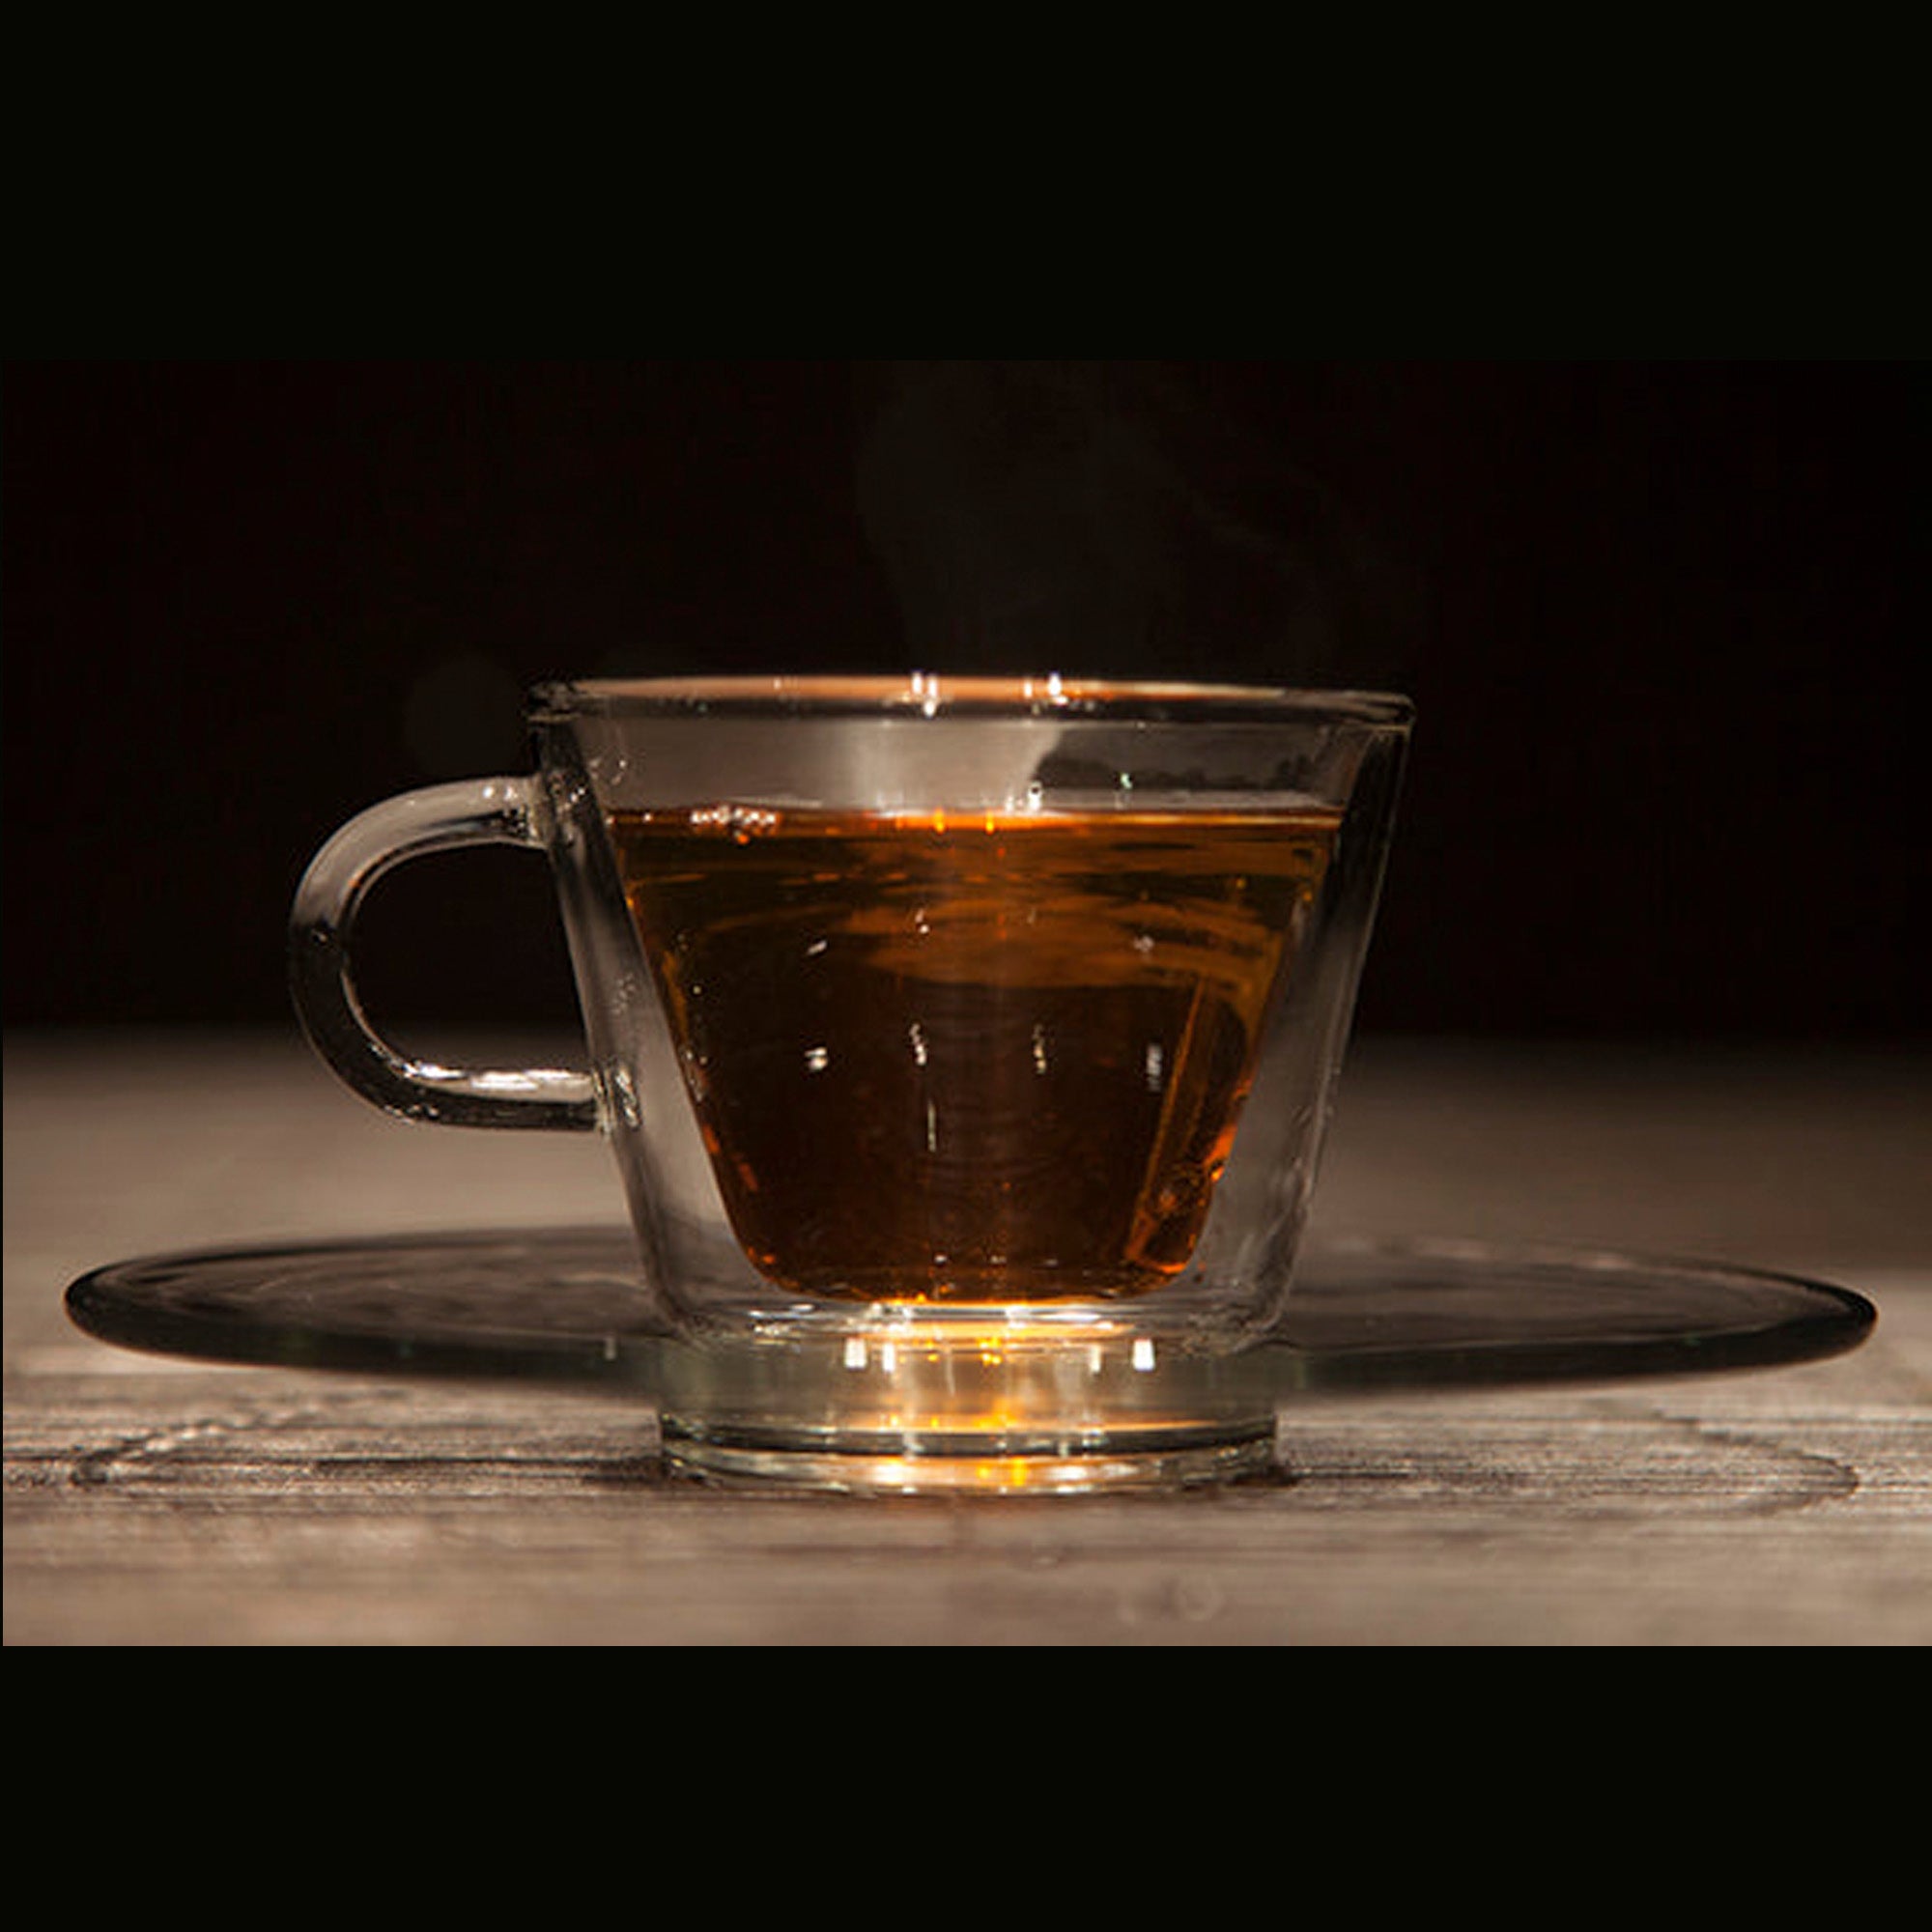 Glass double-walled teacup